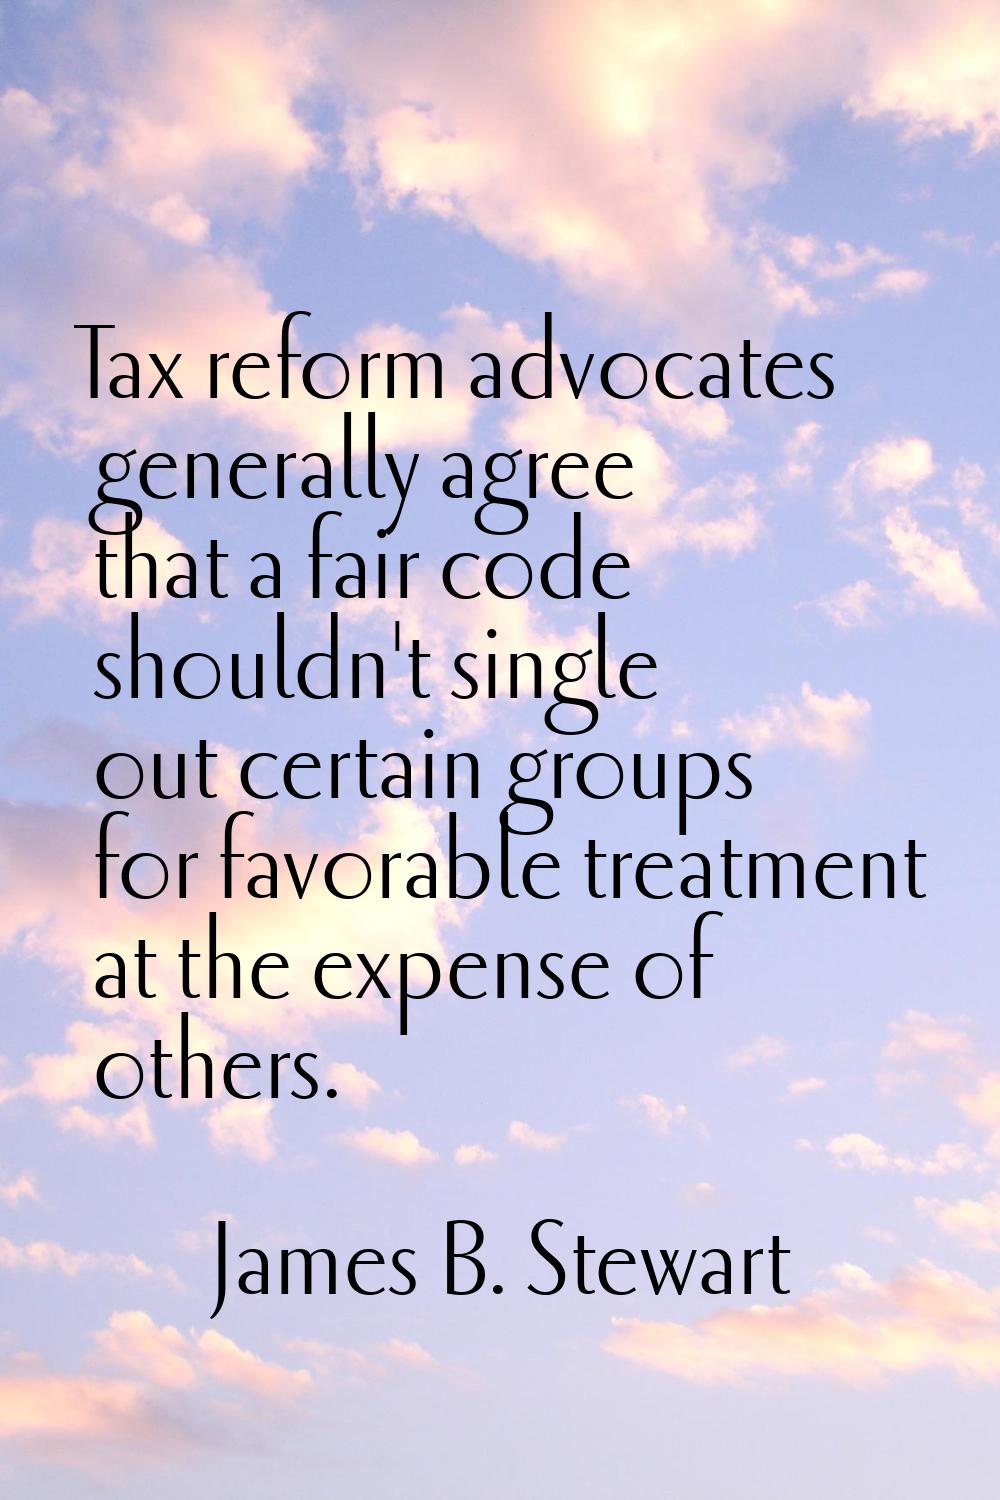 Tax reform advocates generally agree that a fair code shouldn't single out certain groups for favor